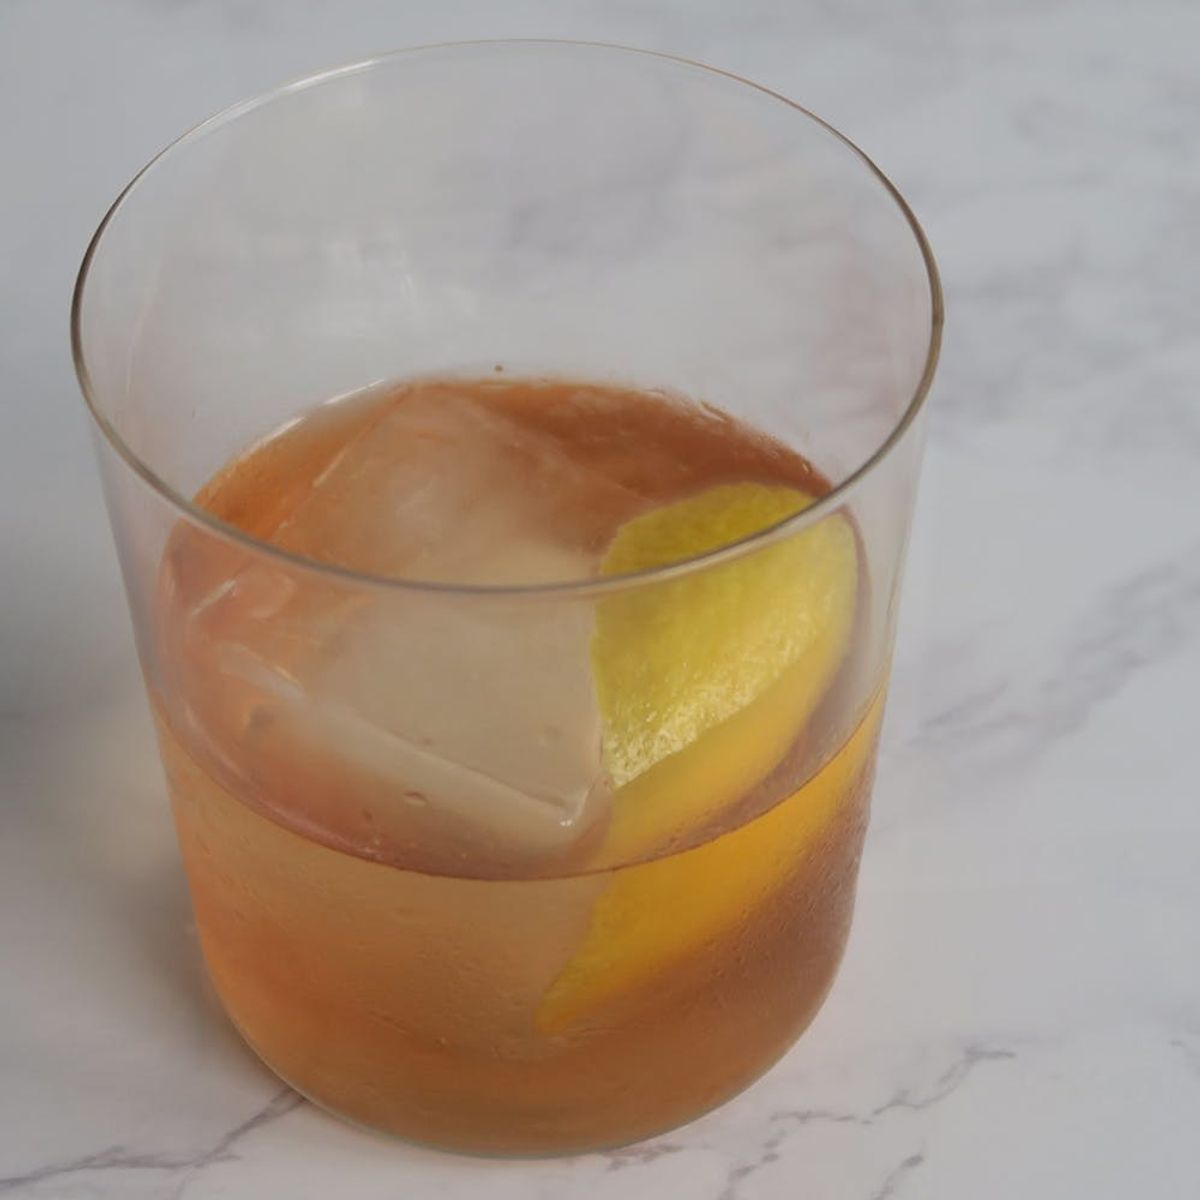 This Is the Official Cocktail of New Orleans for Good Reason!